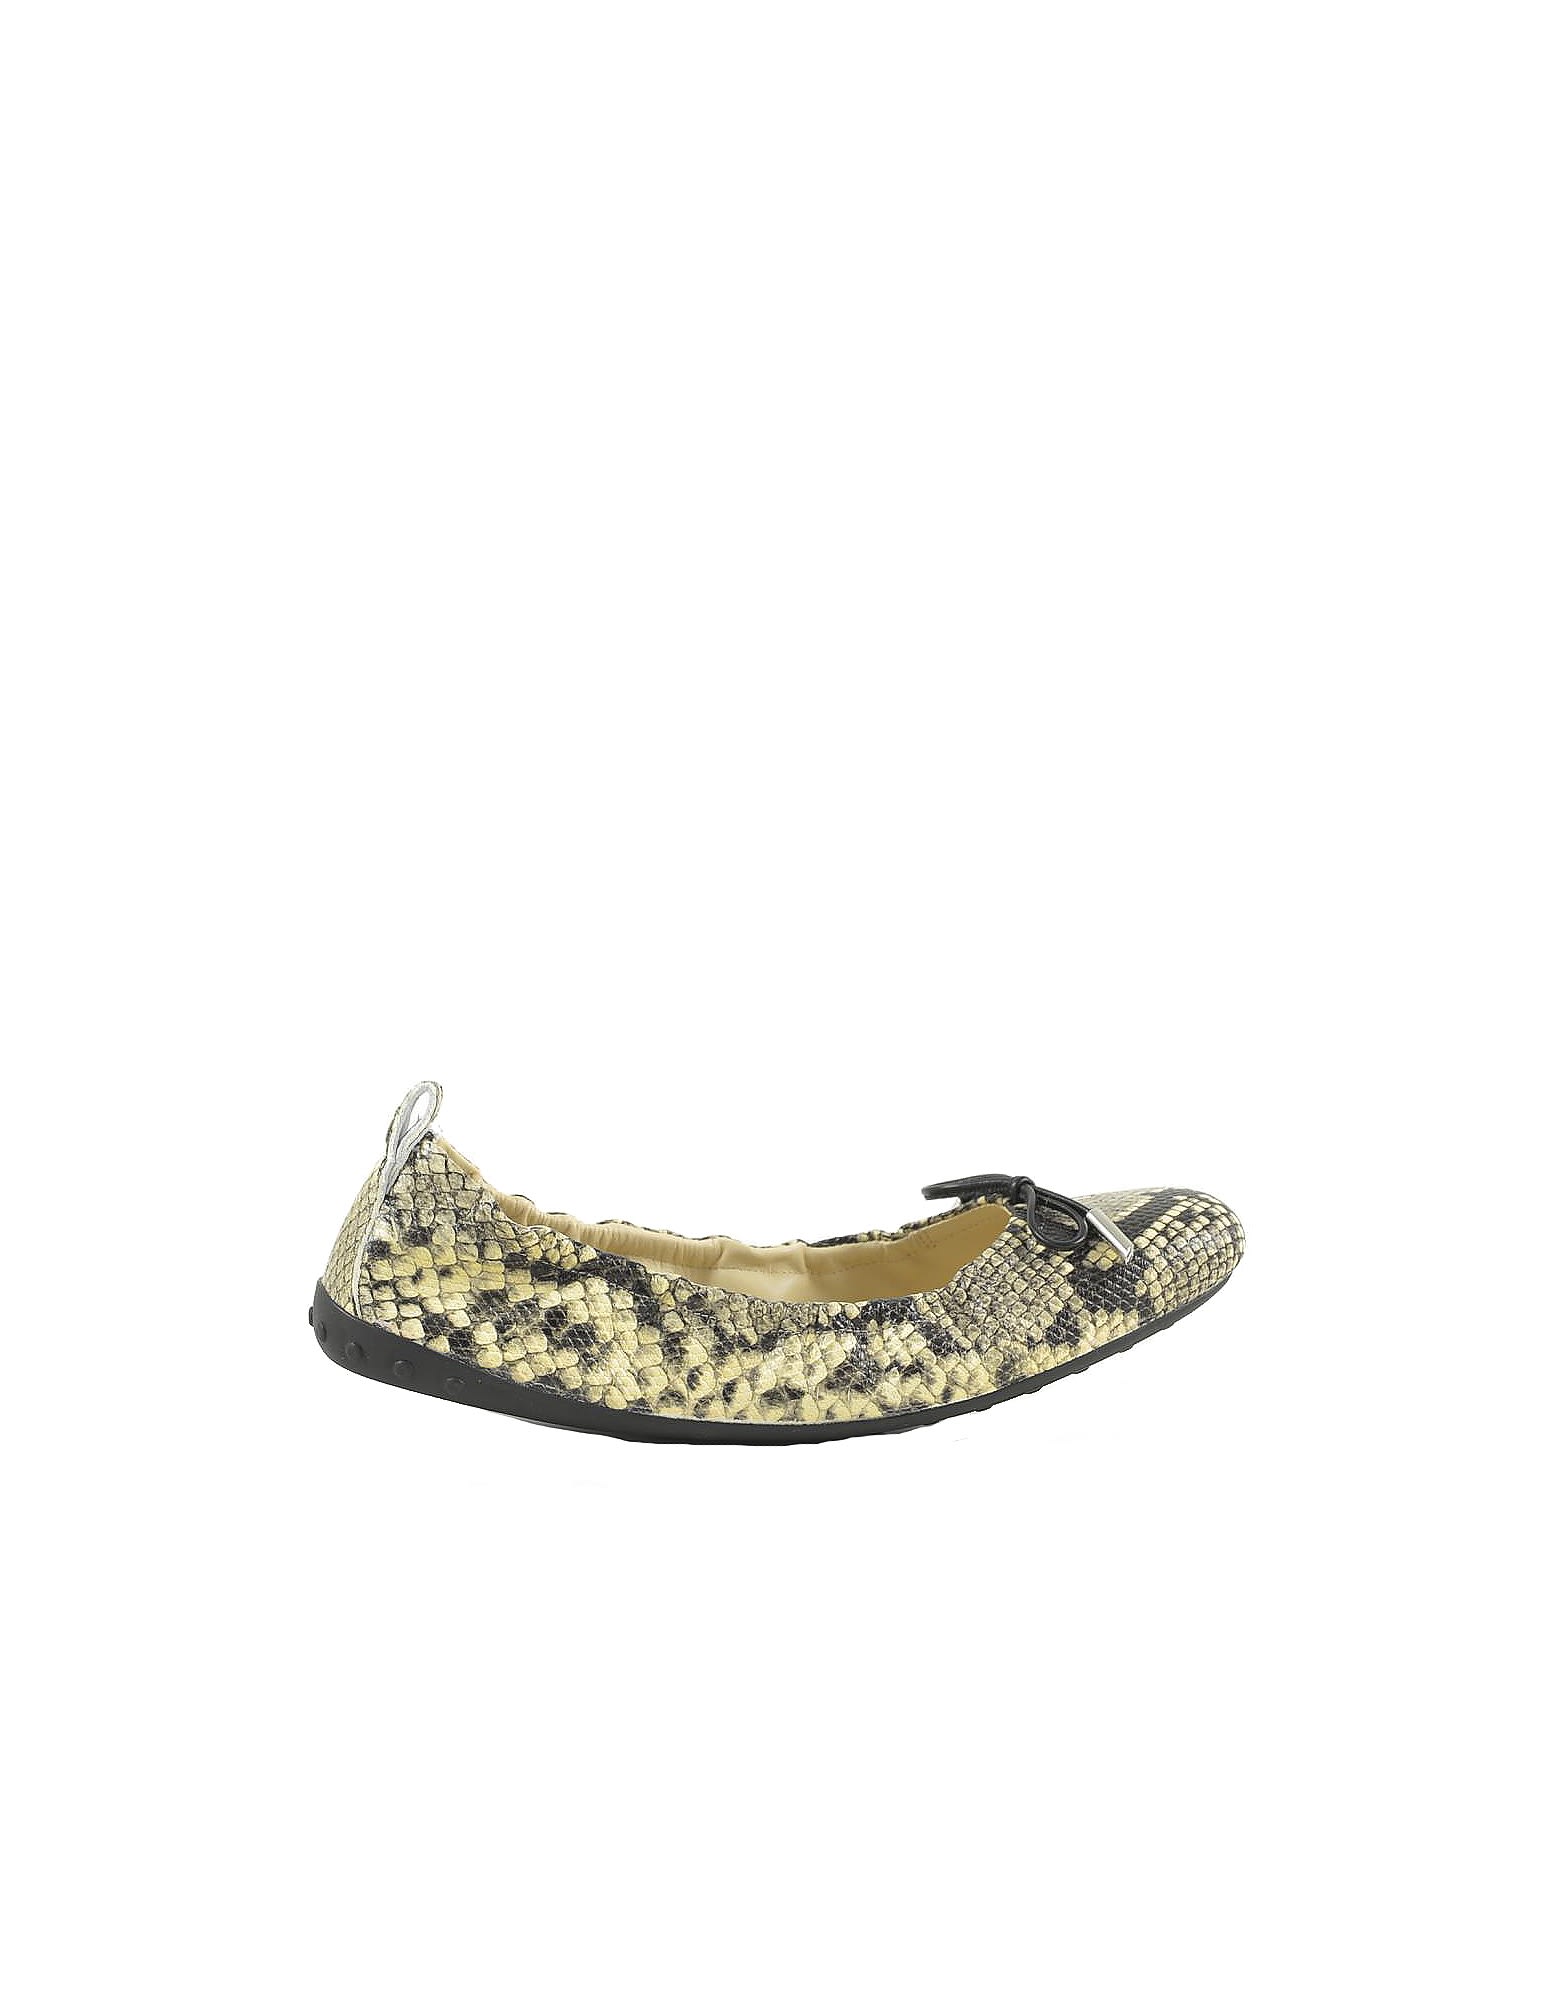 Buy Tods Black / Beige Python Embossed Leather Ballerinas online, shop Tods shoes with free shipping